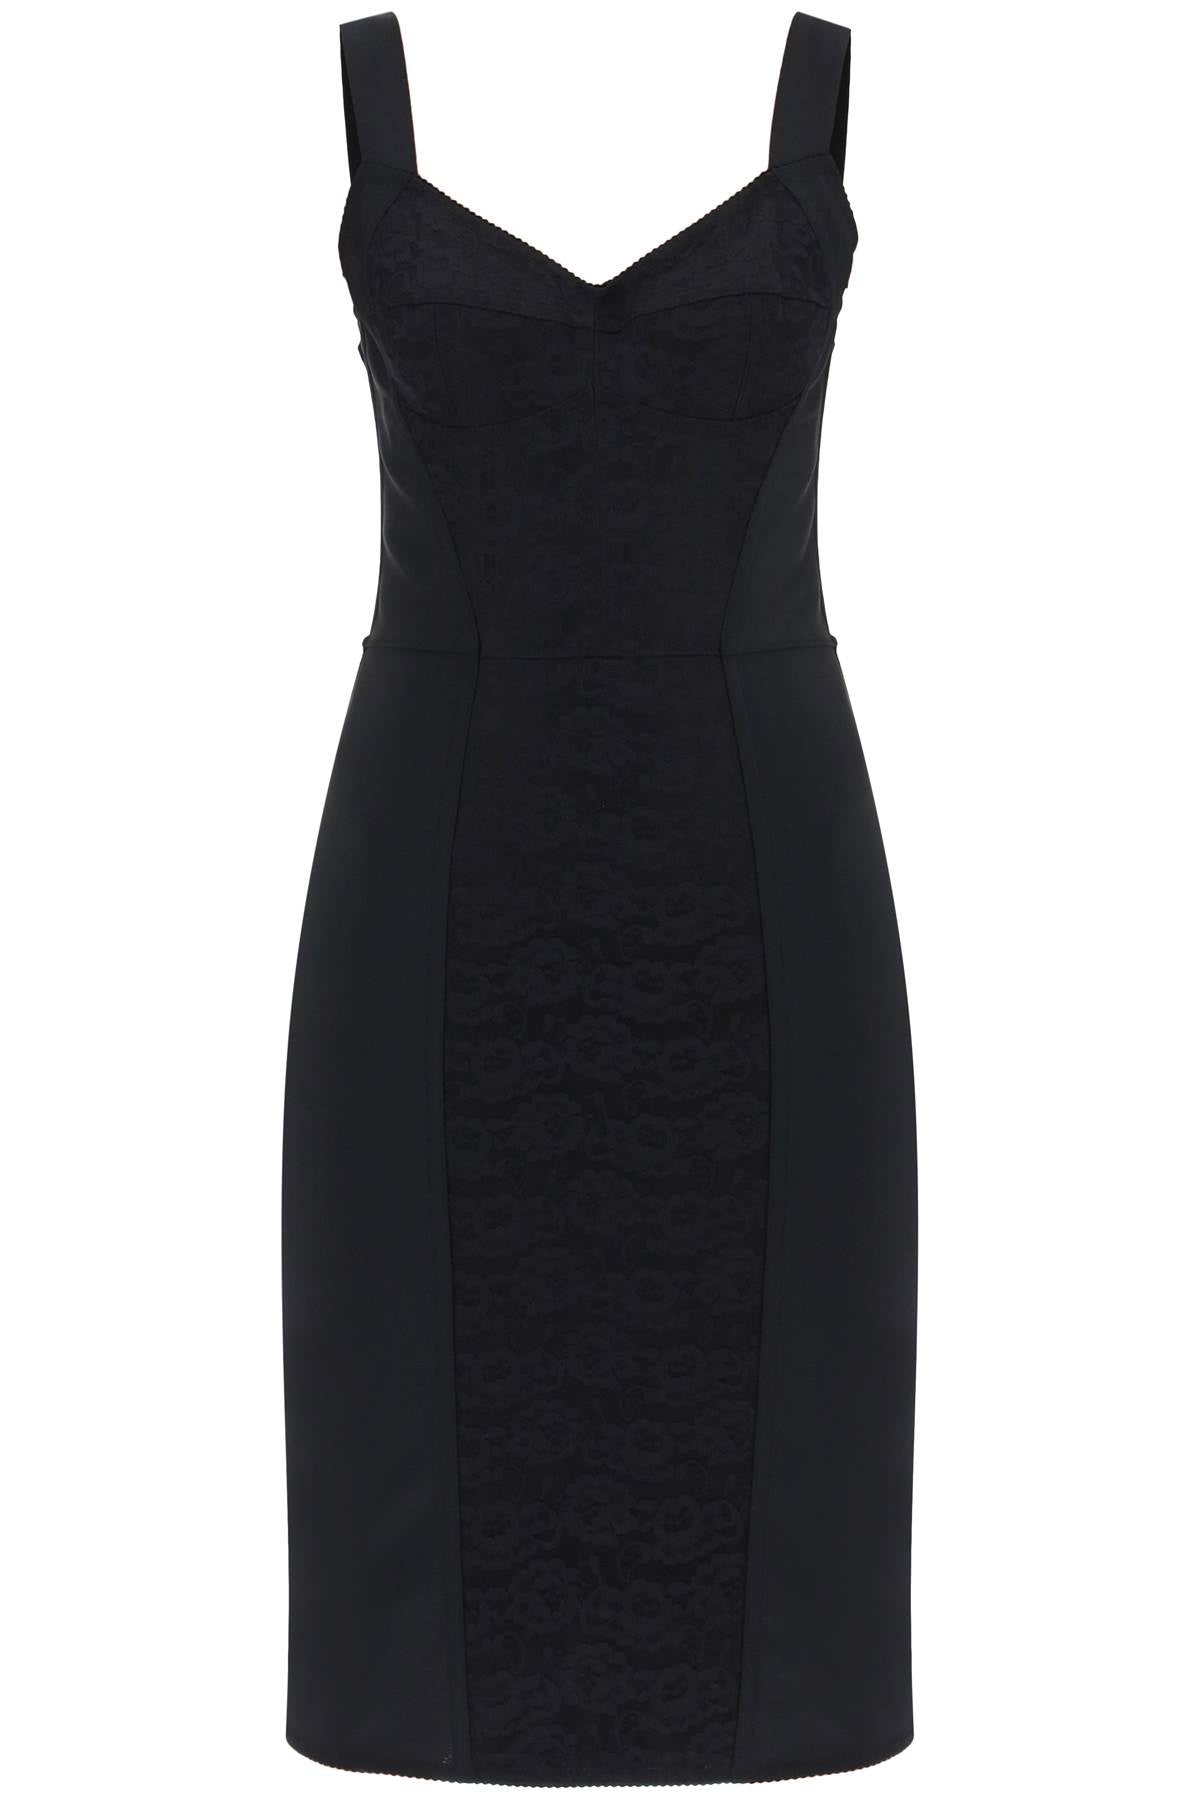 Dolce &amp; Gabbana Bustier Dress With Lace Insert Black